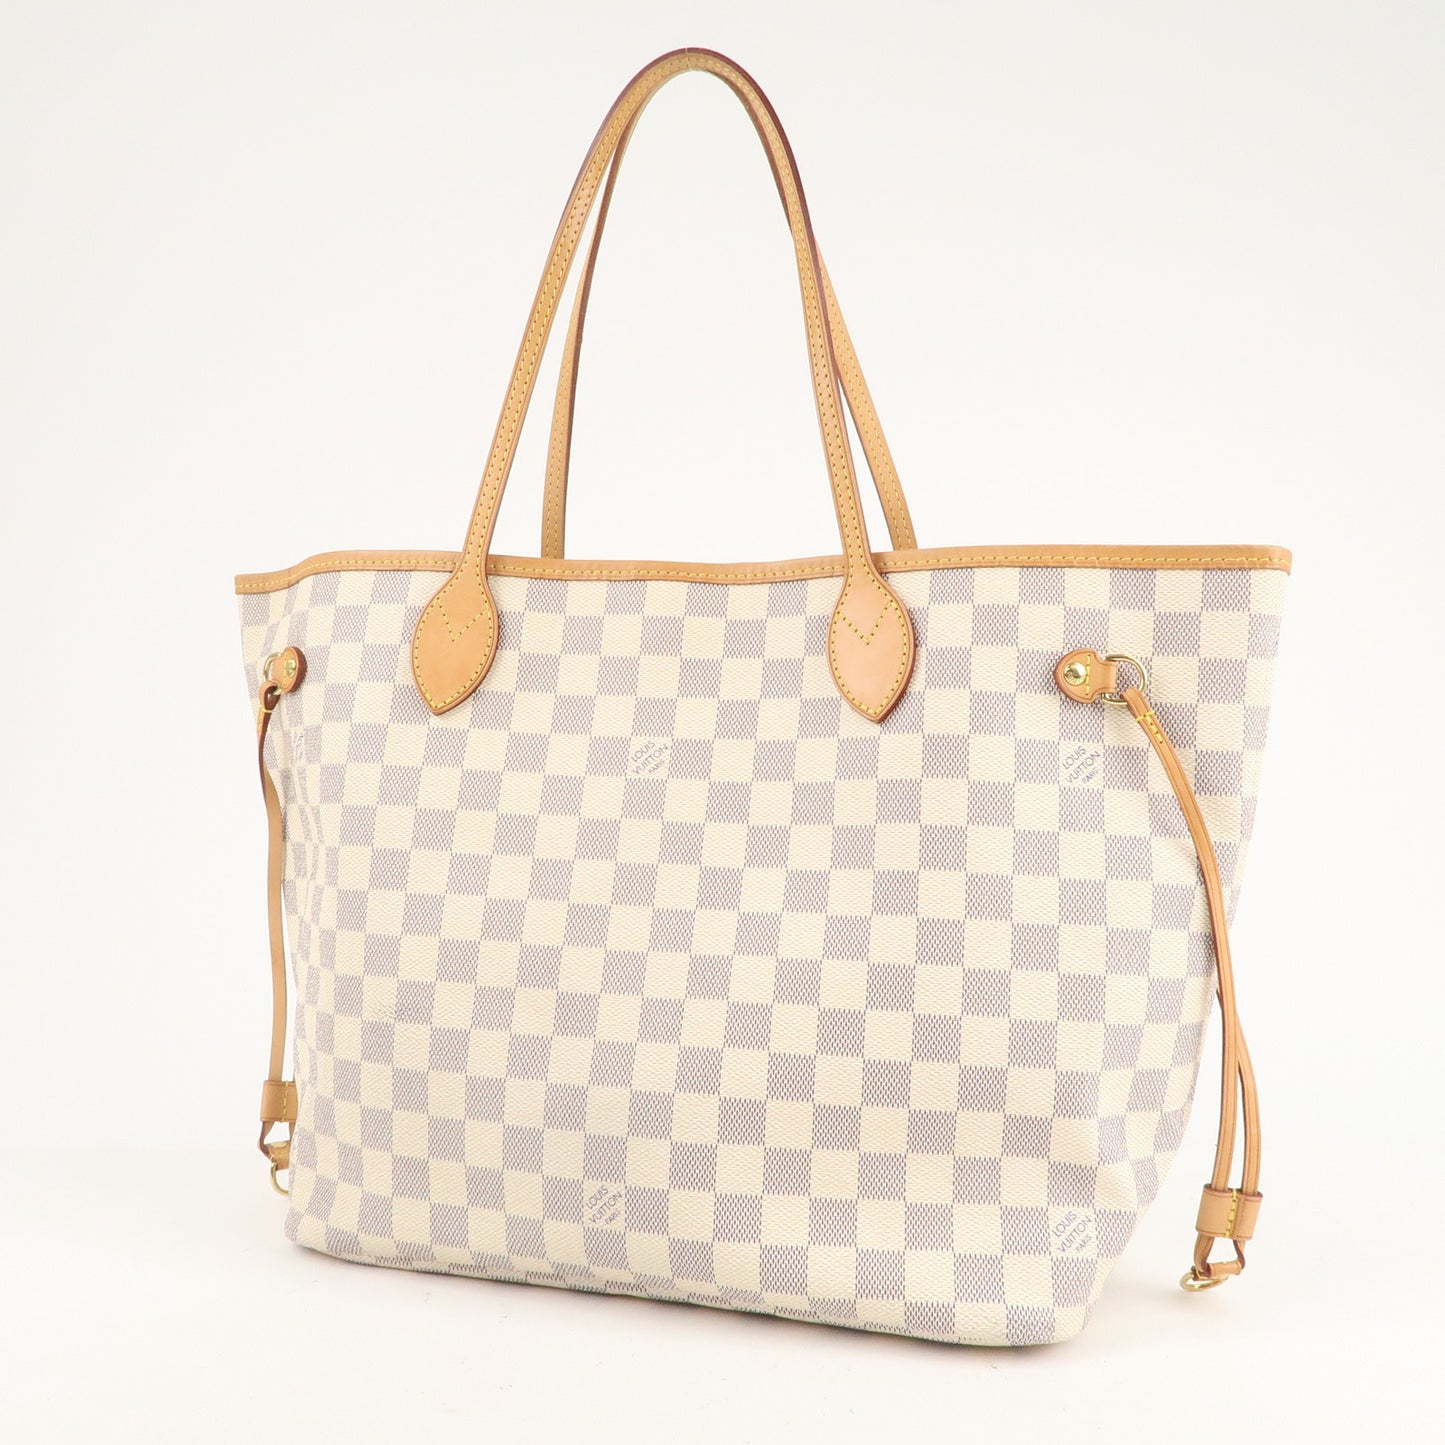 Louis Vuitton 2009 Pre-owned Damier Azur Neverfull mm Tote Bag - Neutrals